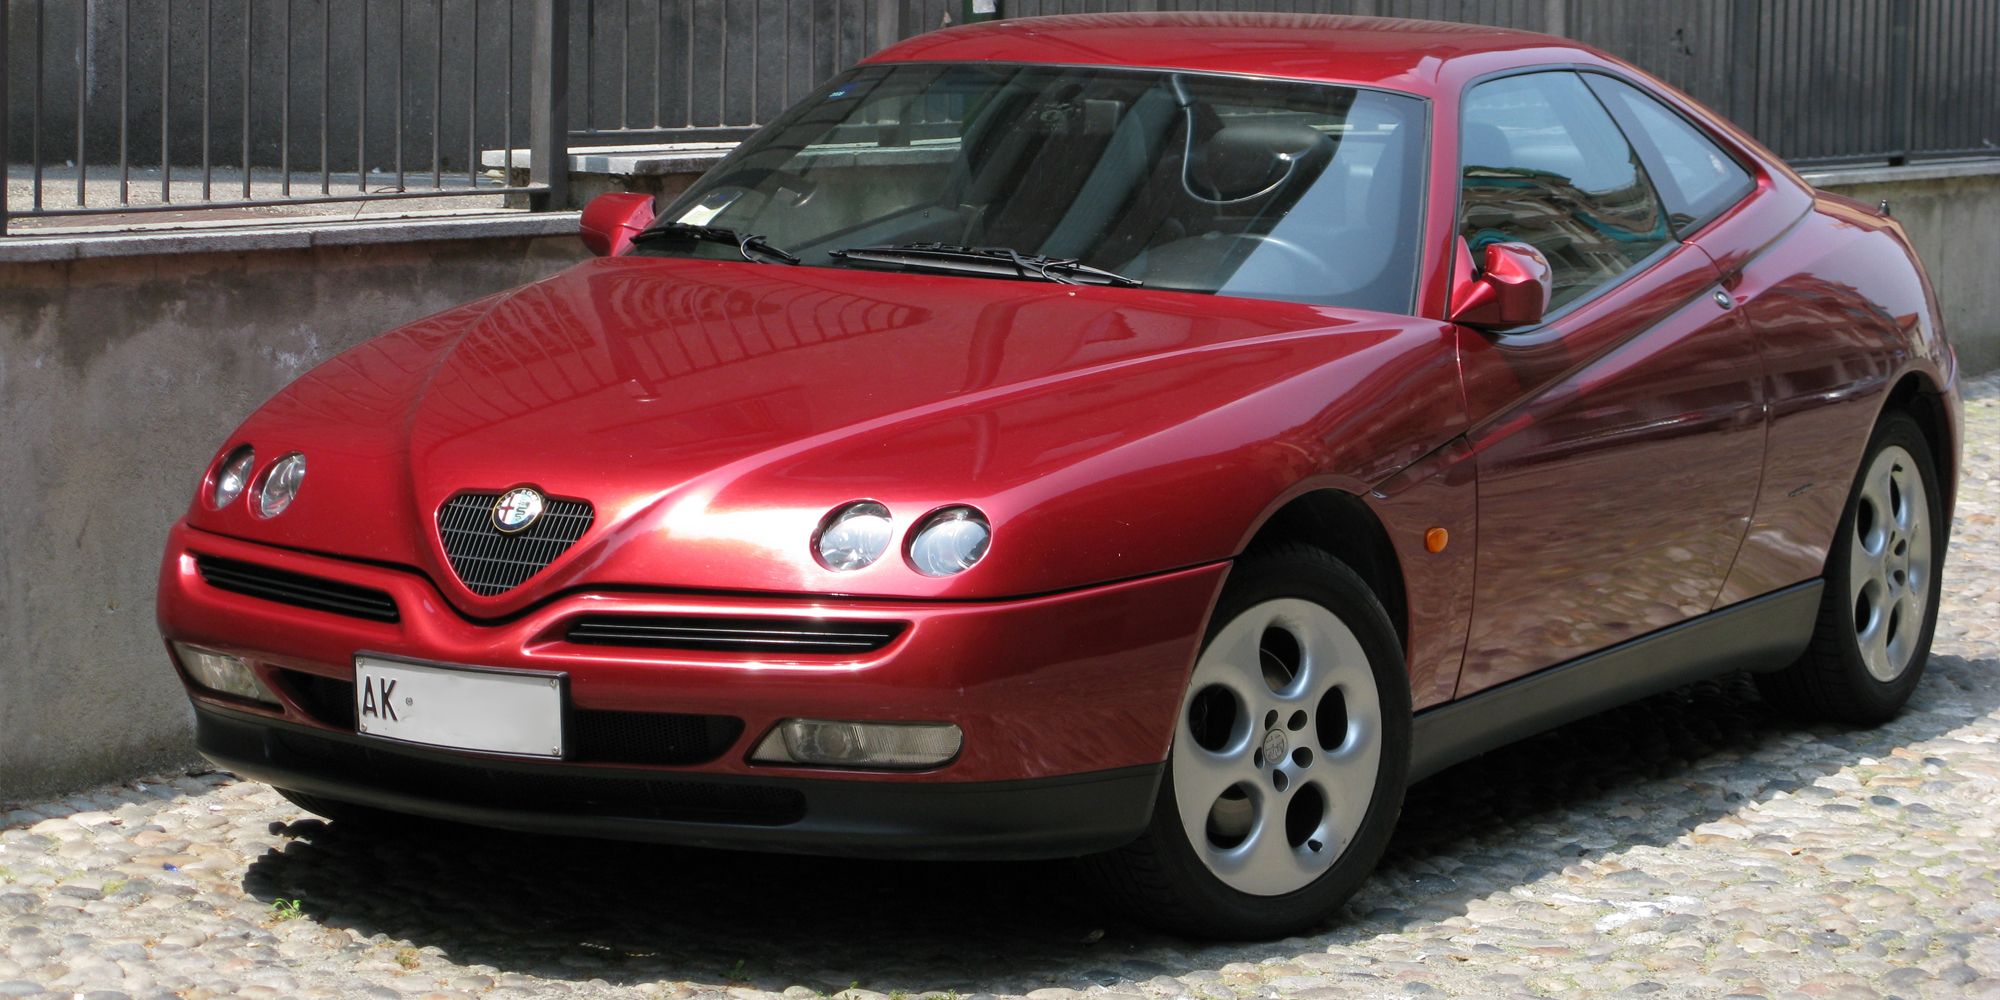 The front of the GTV